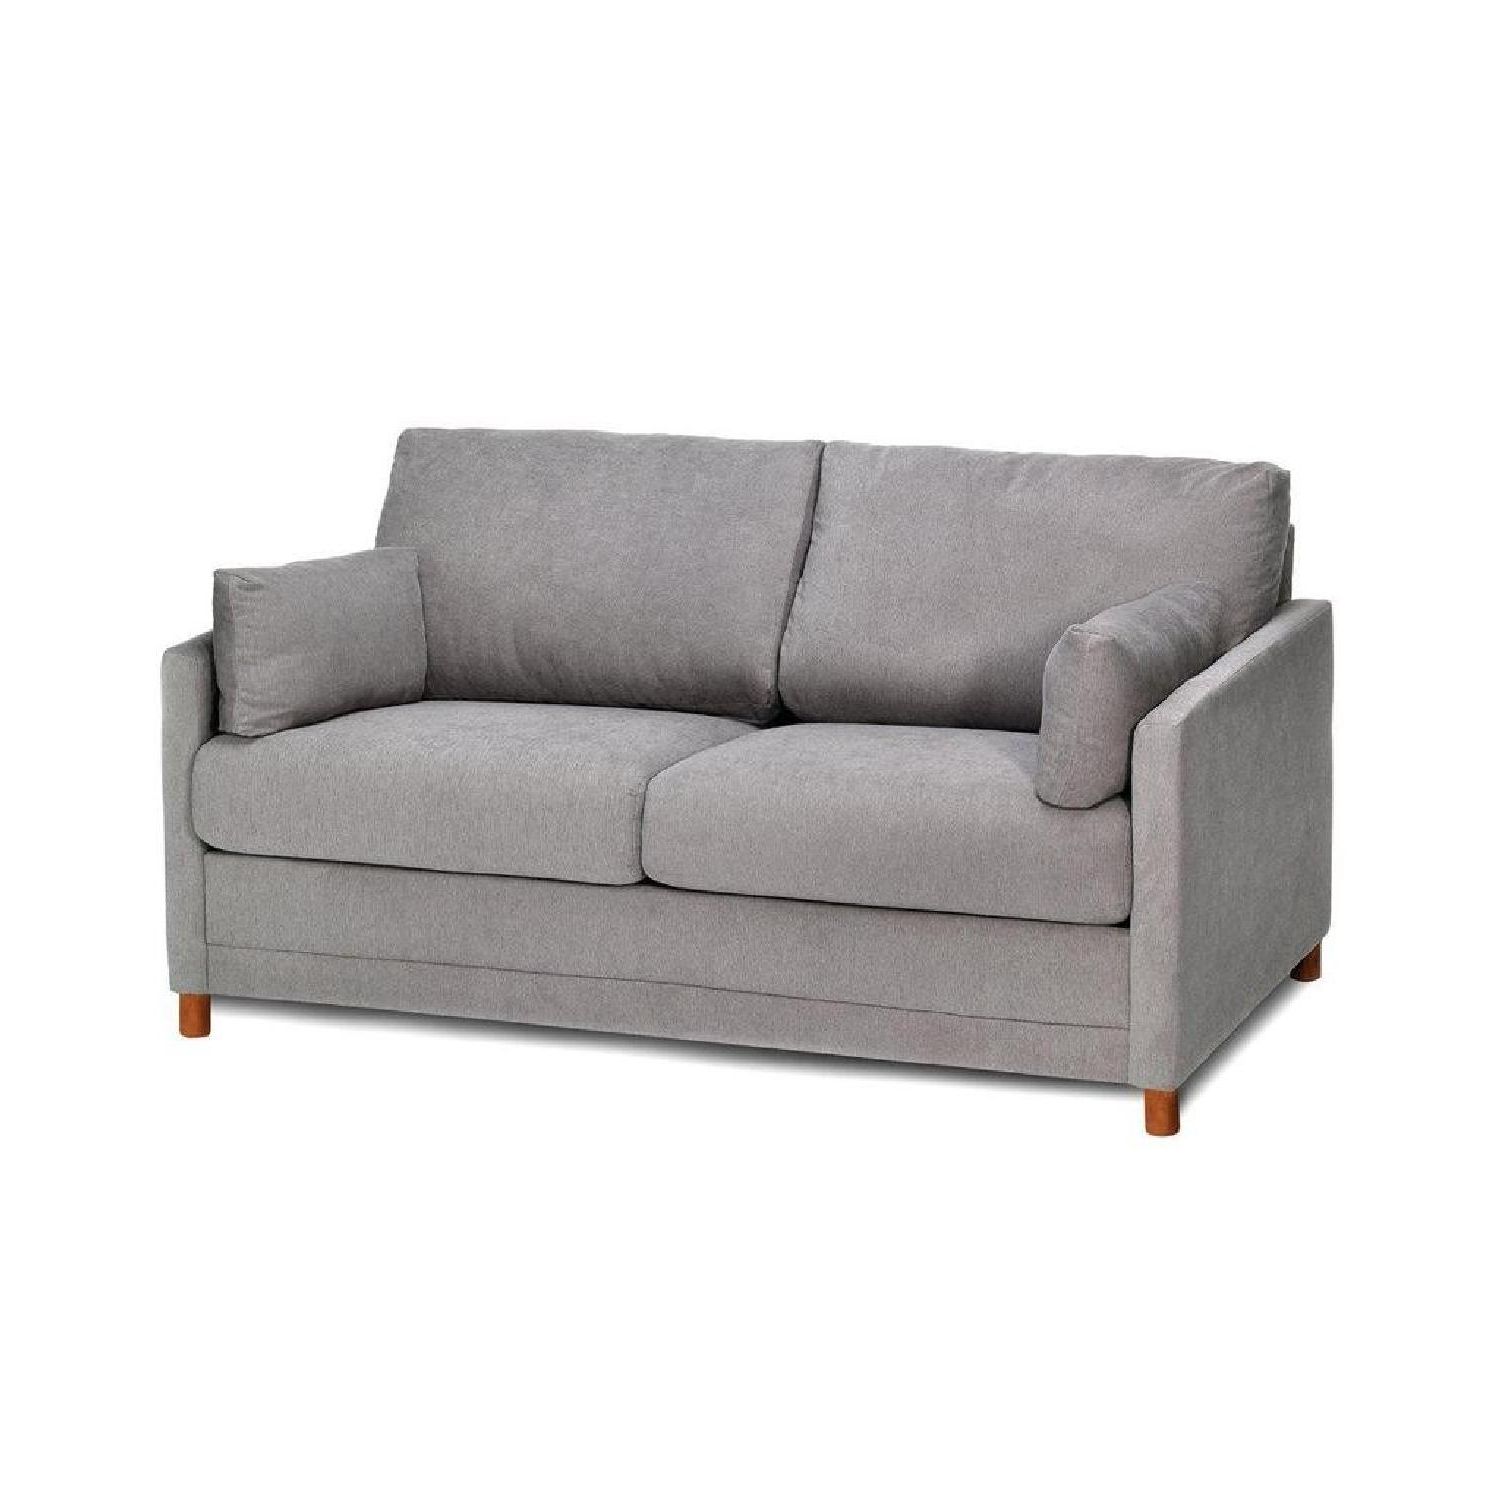 Jennifer Convertibles Modern Full Sleeper Sofa In Grey – Aptdeco For Well Liked Convertible Gray Loveseat Sleepers (View 4 of 15)